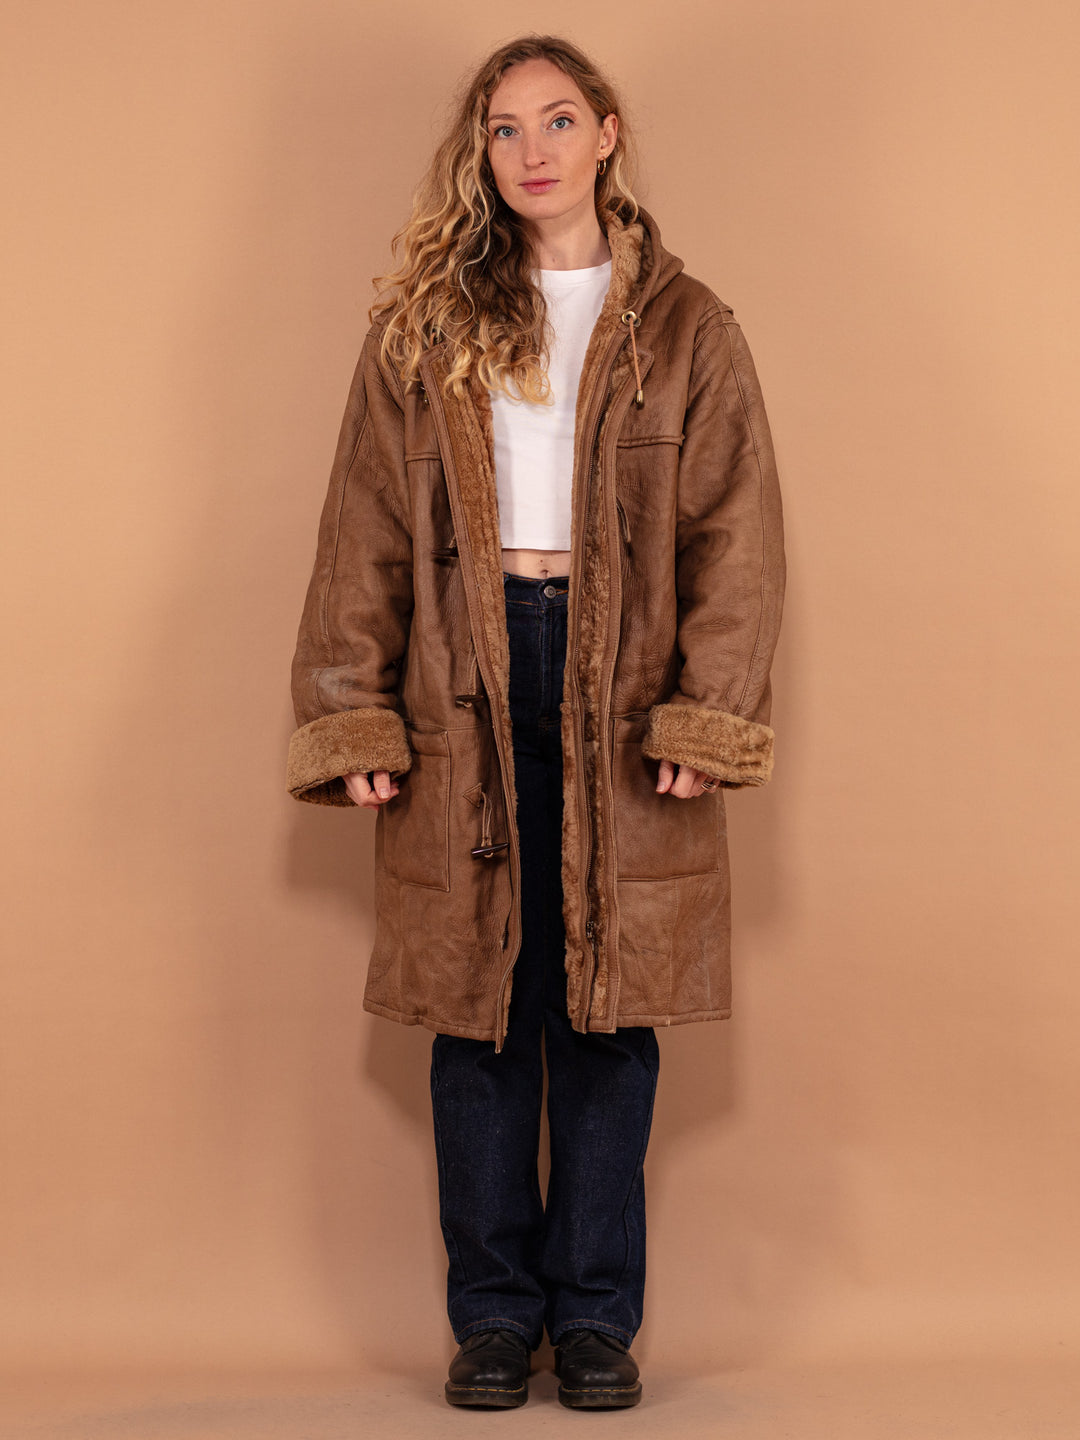 Oversized 90's Shearling Coat, Size XL, Vintage Women Casual Winter Coat, Brown Leather Duffle Coat, Zip Up Toggle Coat, 90s Sheep Outerwear